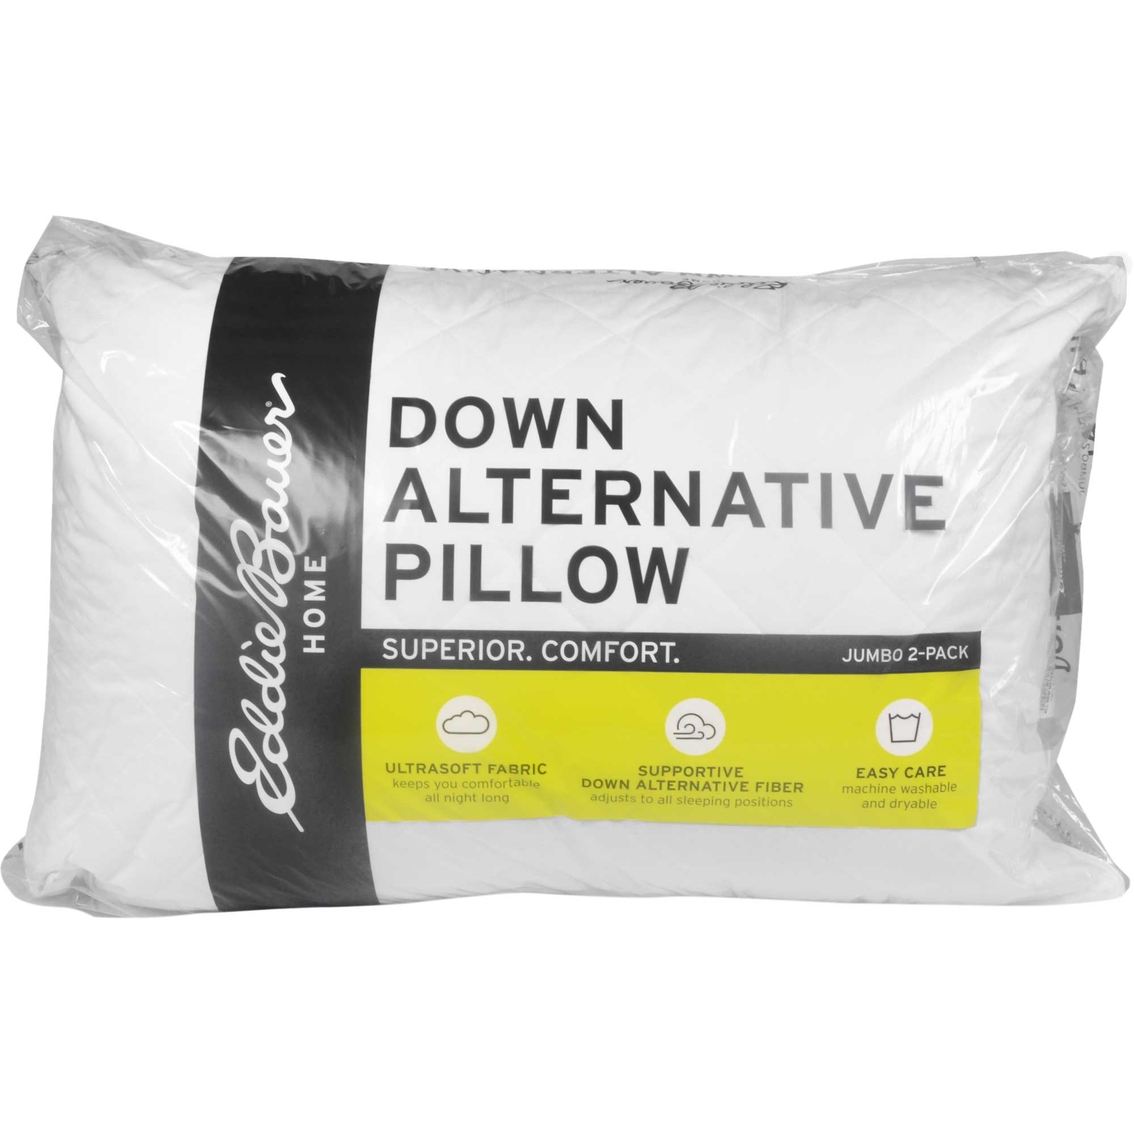 Eddie Bauer Quilted Gel Pillow 2 pk. - Image 7 of 7